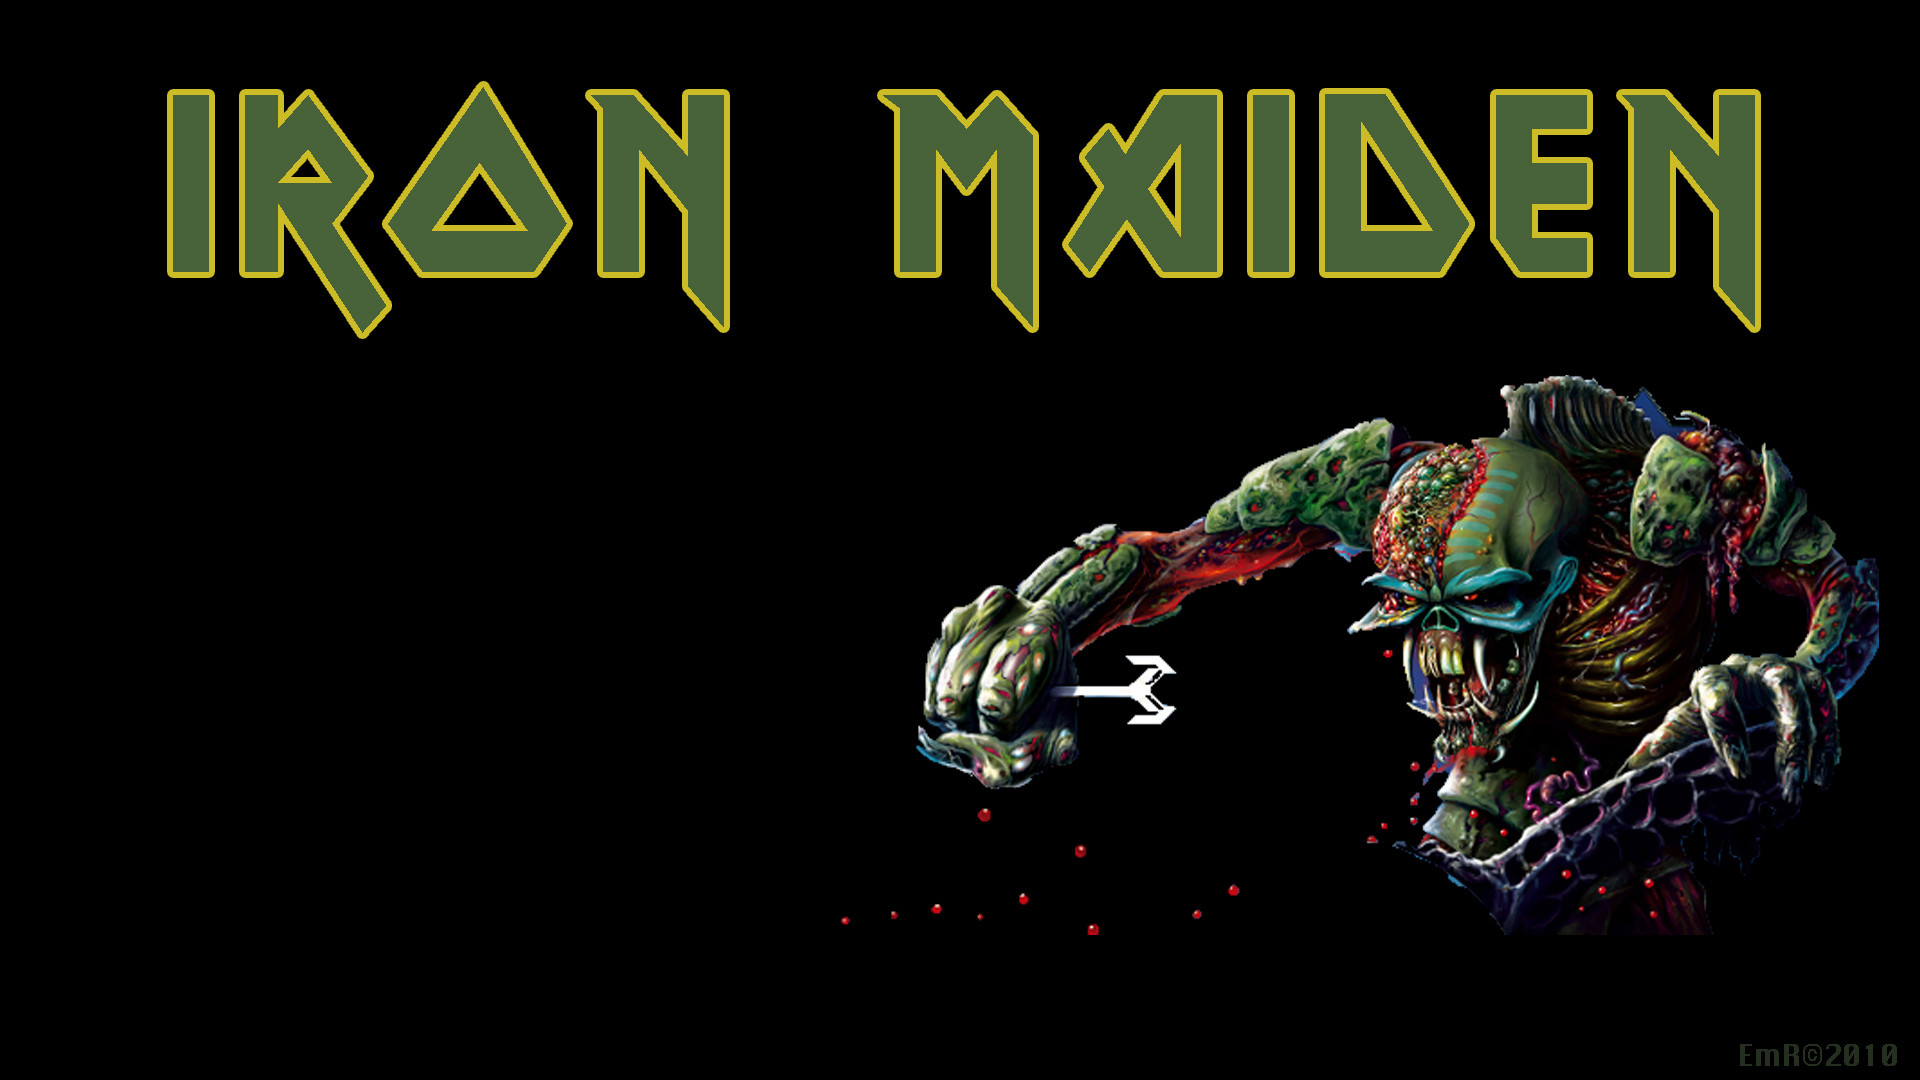 1920x1080 Iron Maiden images The Final Frontier HD wallpaper and background photos